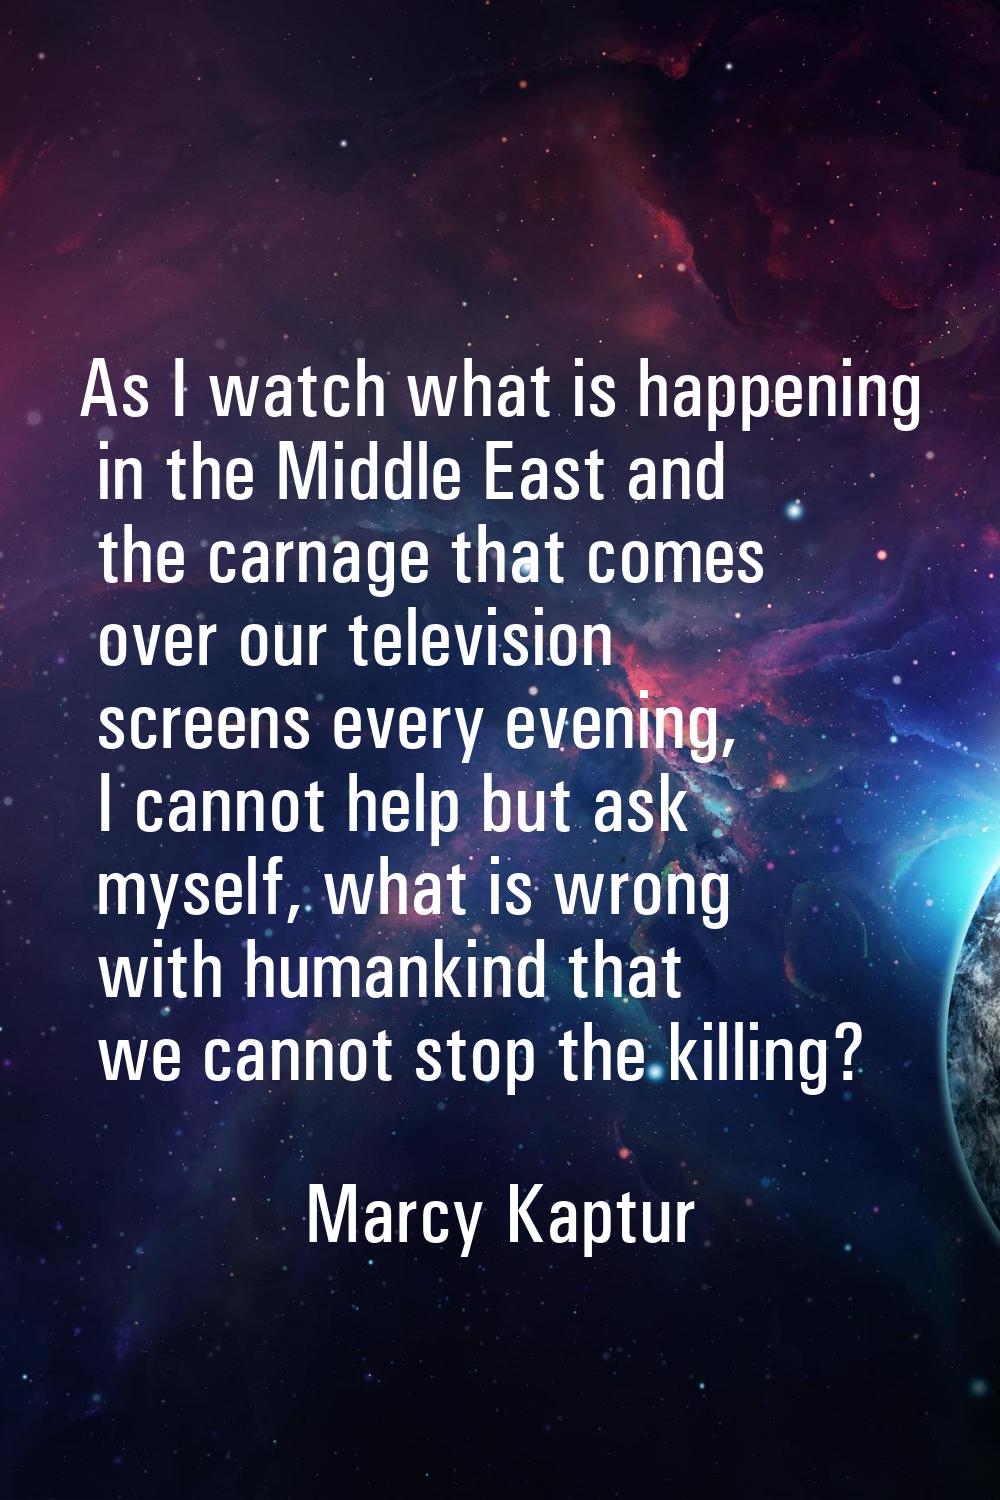 As I watch what is happening in the Middle East and the carnage that comes over our television scre